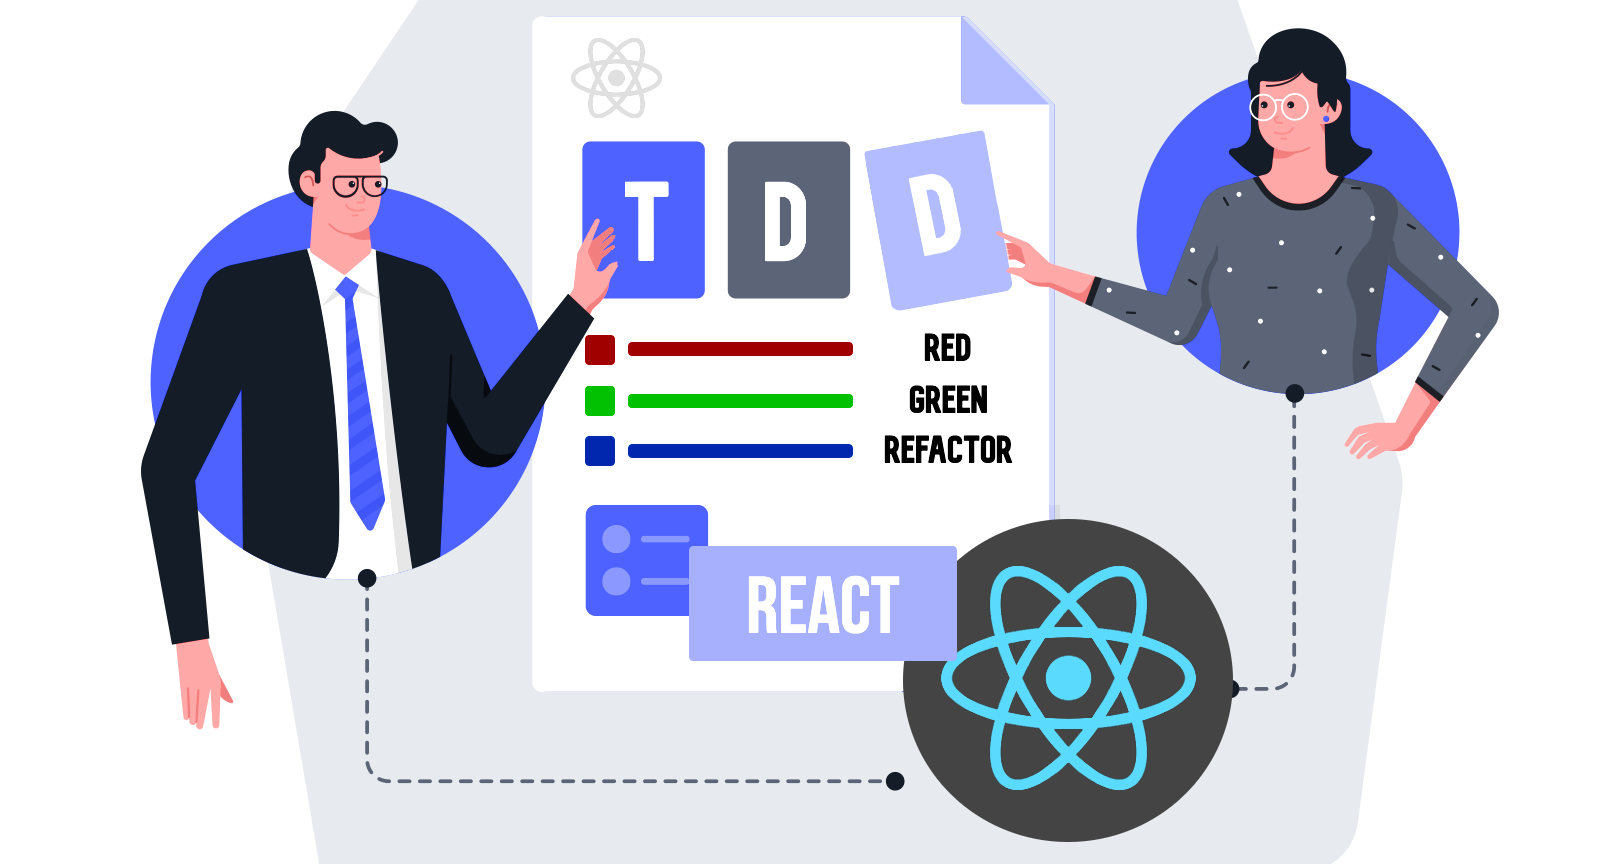 Step-by-step real-world example of ATDD (Acceptance Test Driven Development) with React